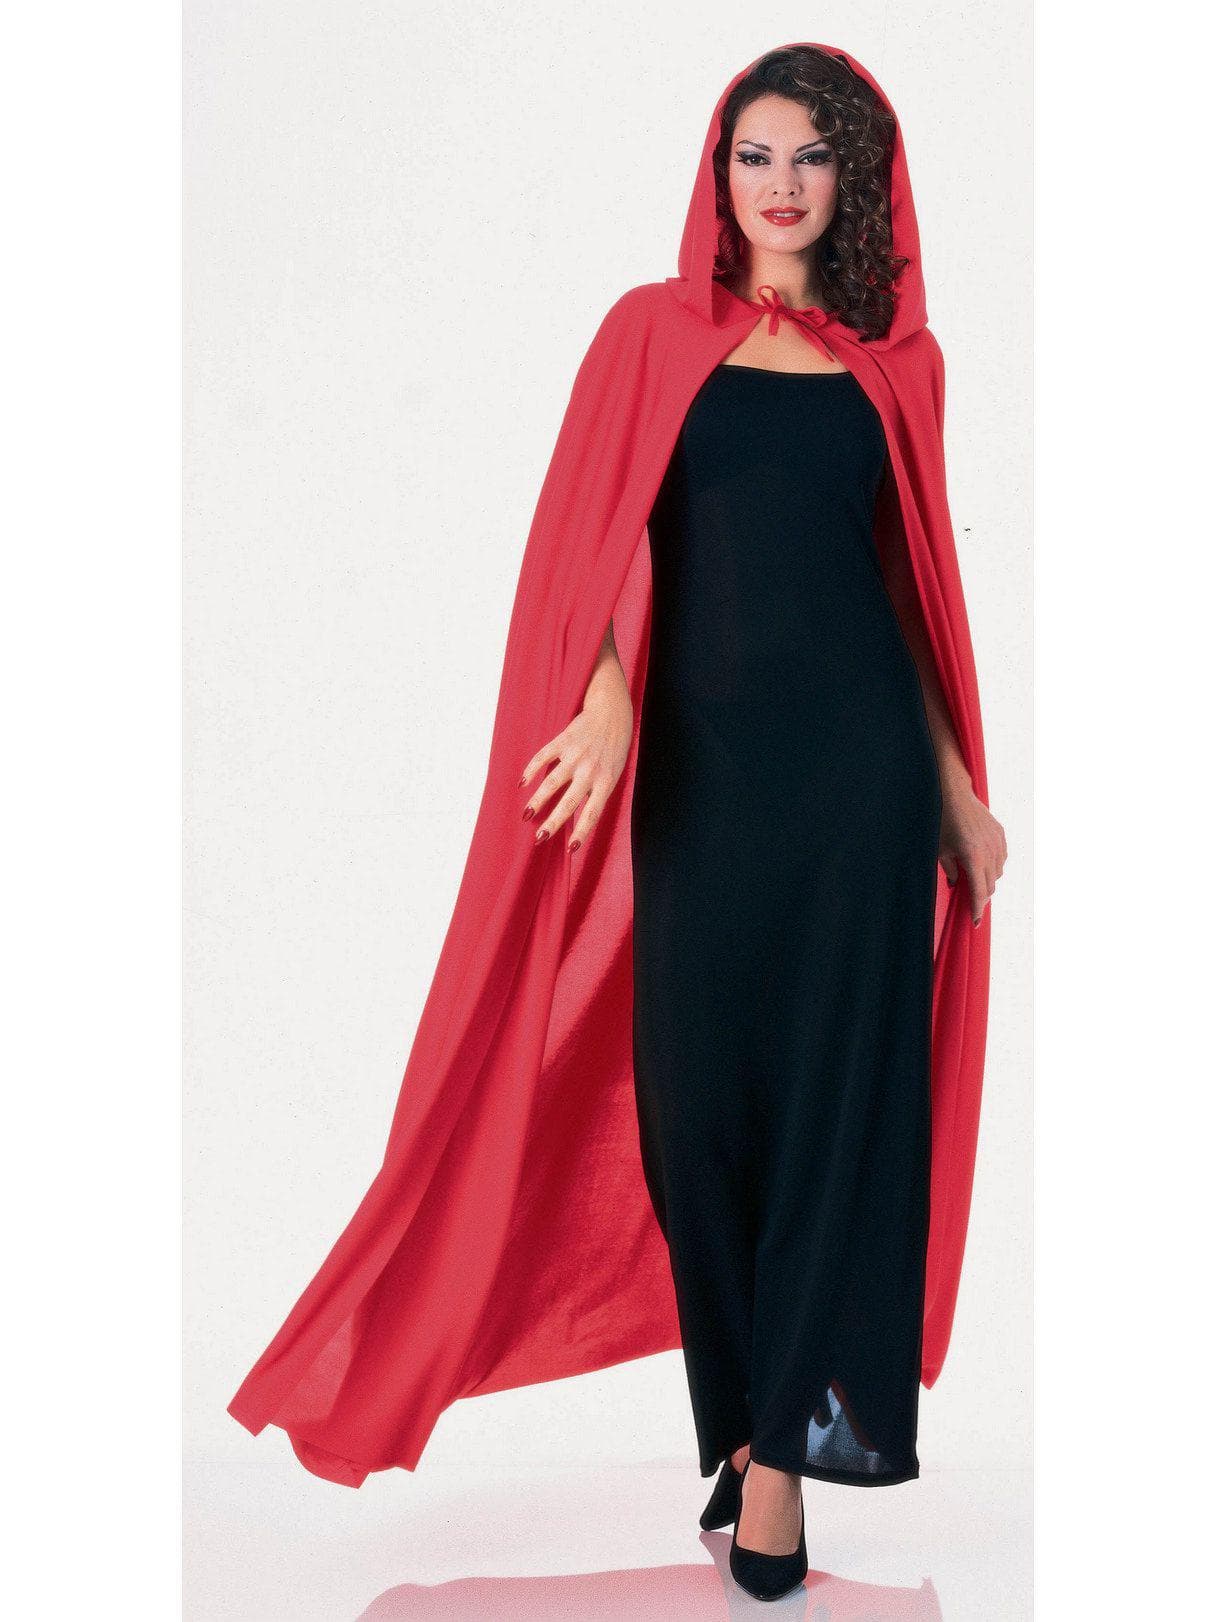 Hooded Red Cape - costumes.com